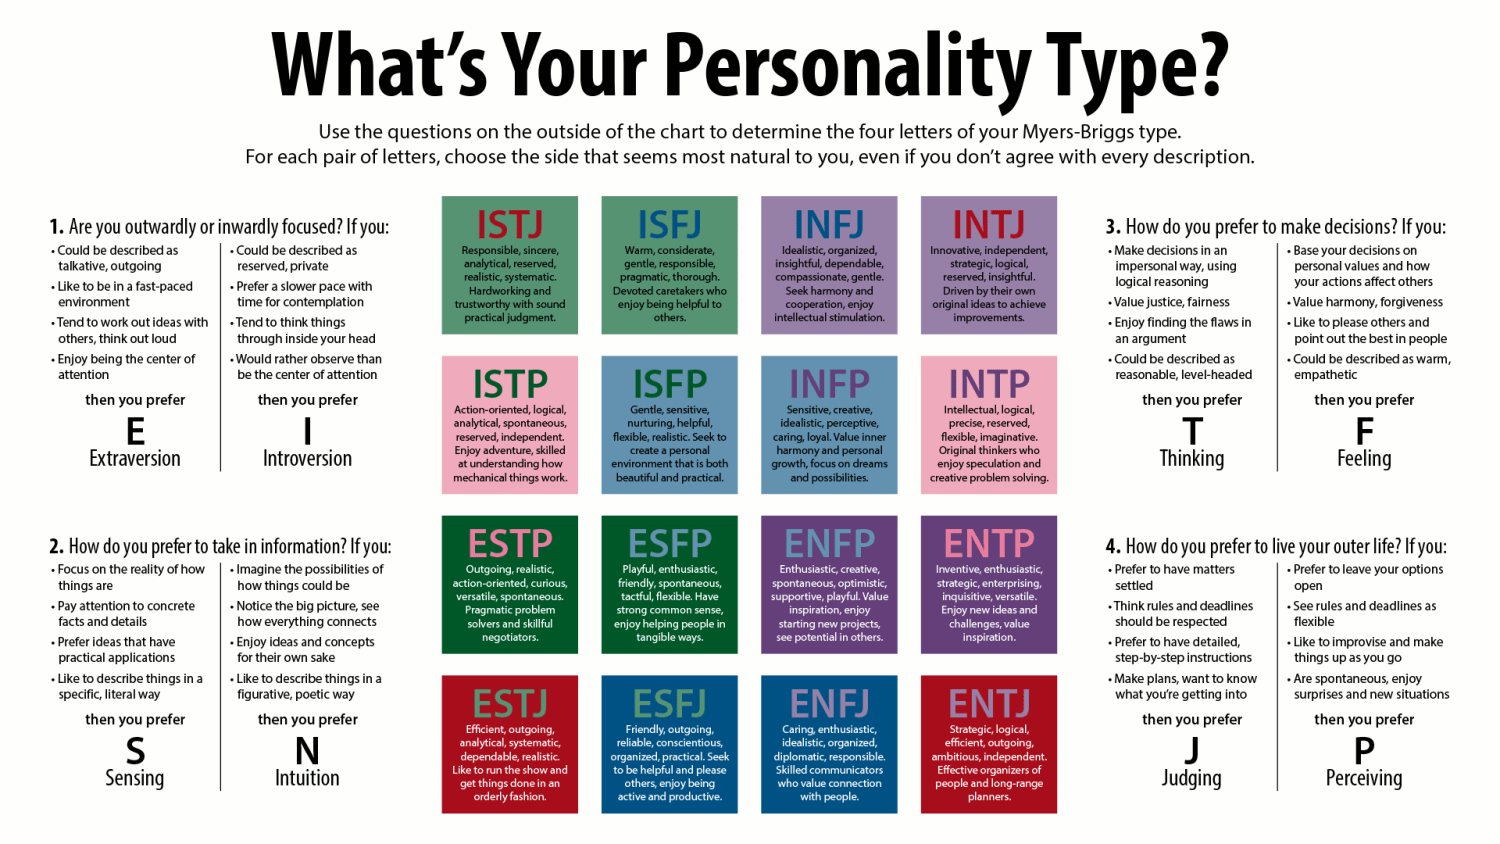 Myers-Briggs personality types